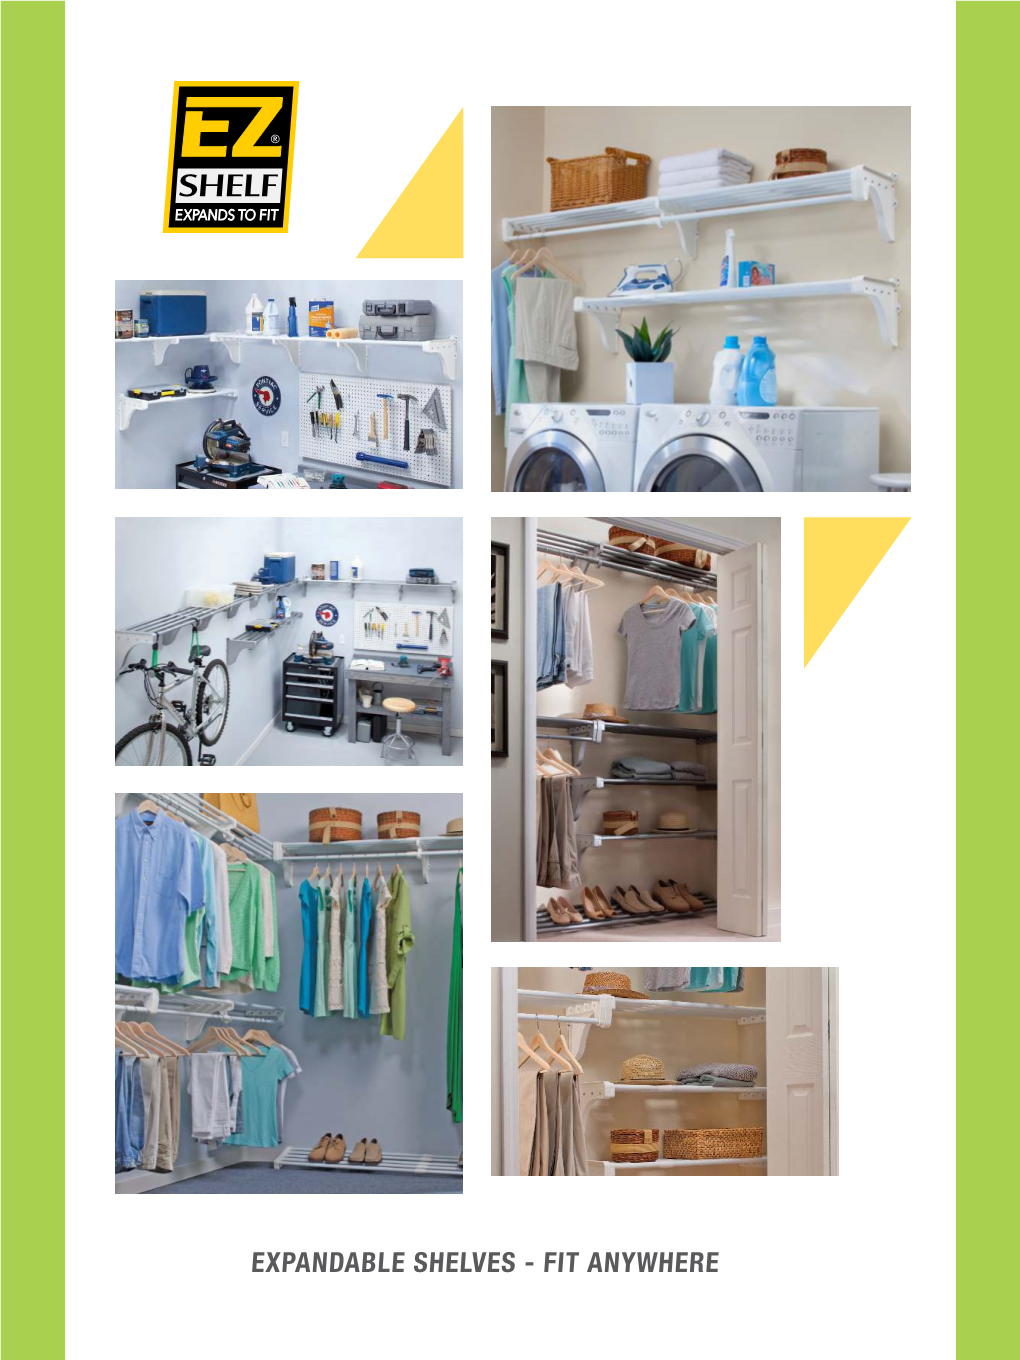 Expandable Shelves - Fit Anywhere Are You Looking to Get Organized?